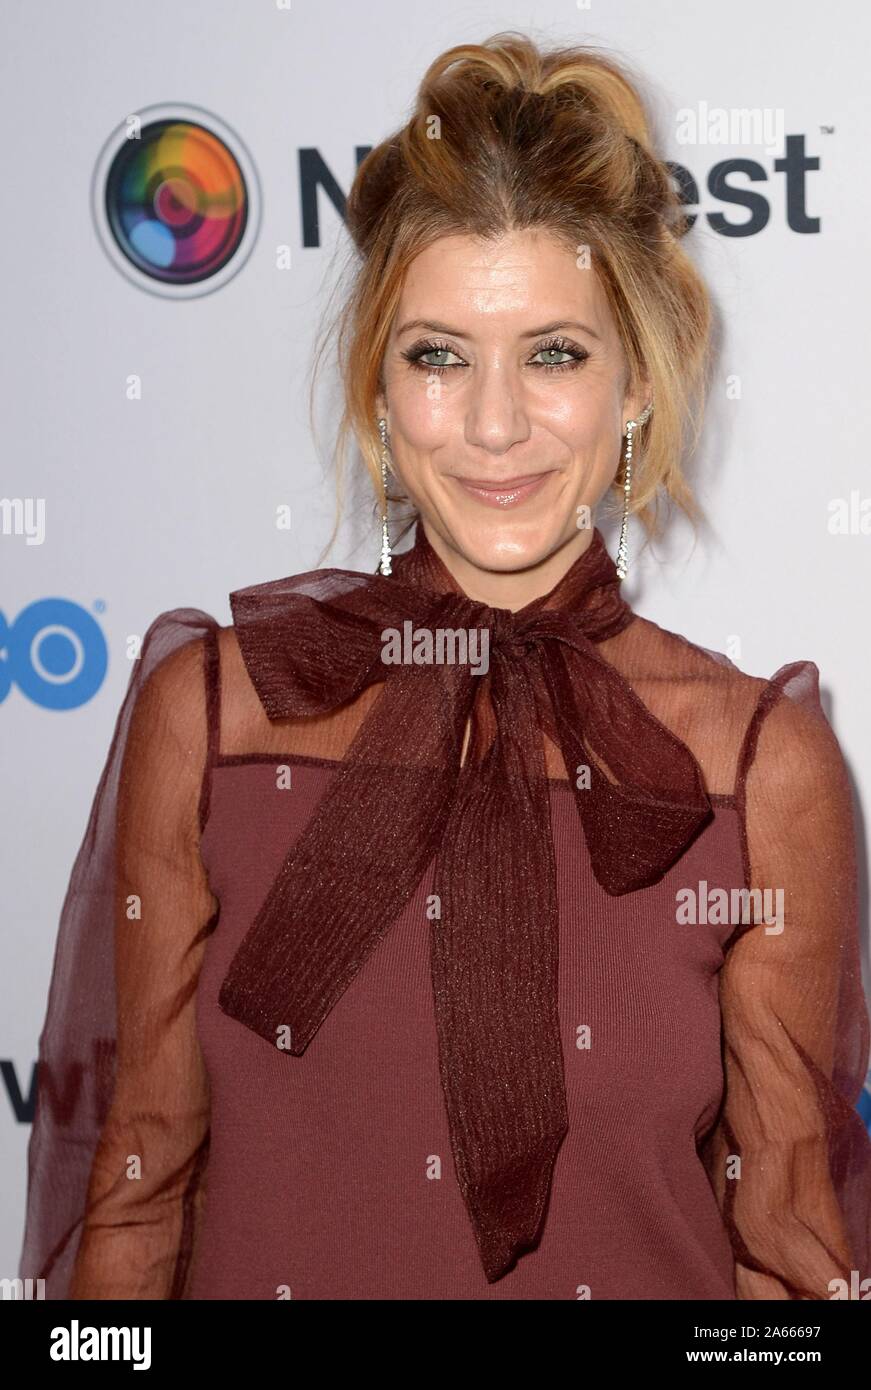 New York, NY, USA. 23rd Oct, 2019. Kate Walsh at arrivals for SELL BY Screening at NewFest 2019 Opening Night, SVA Theater, New York, NY October 23, 2019. Credit: Kristin Callahan/Everett Collection/Alamy Live News Stock Photo